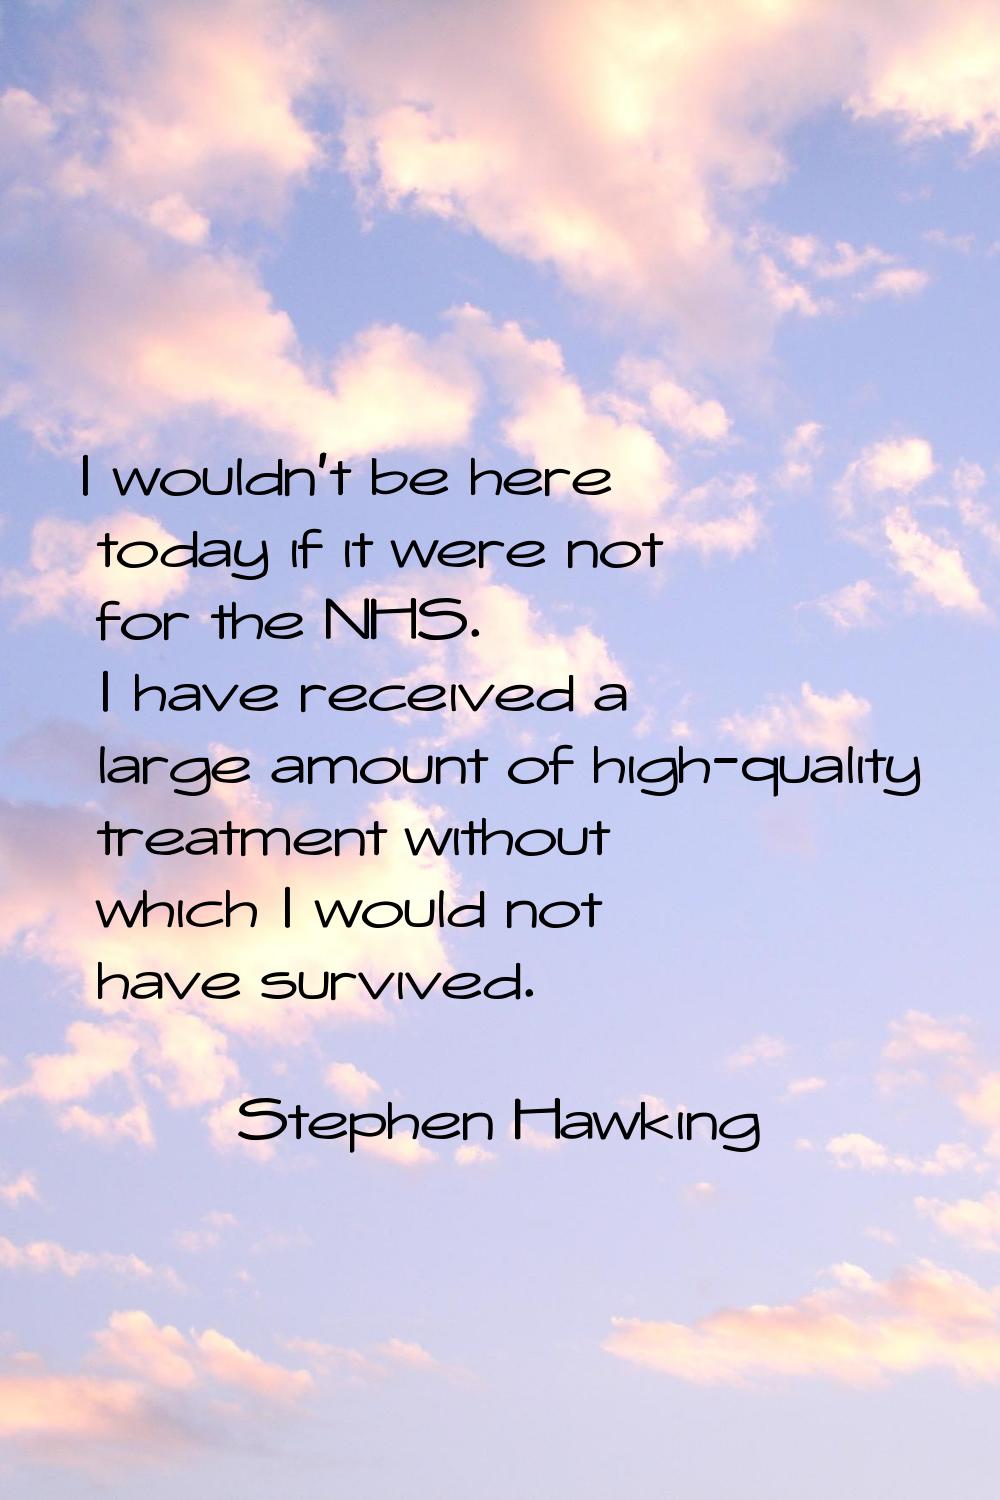 I wouldn't be here today if it were not for the NHS. I have received a large amount of high-quality